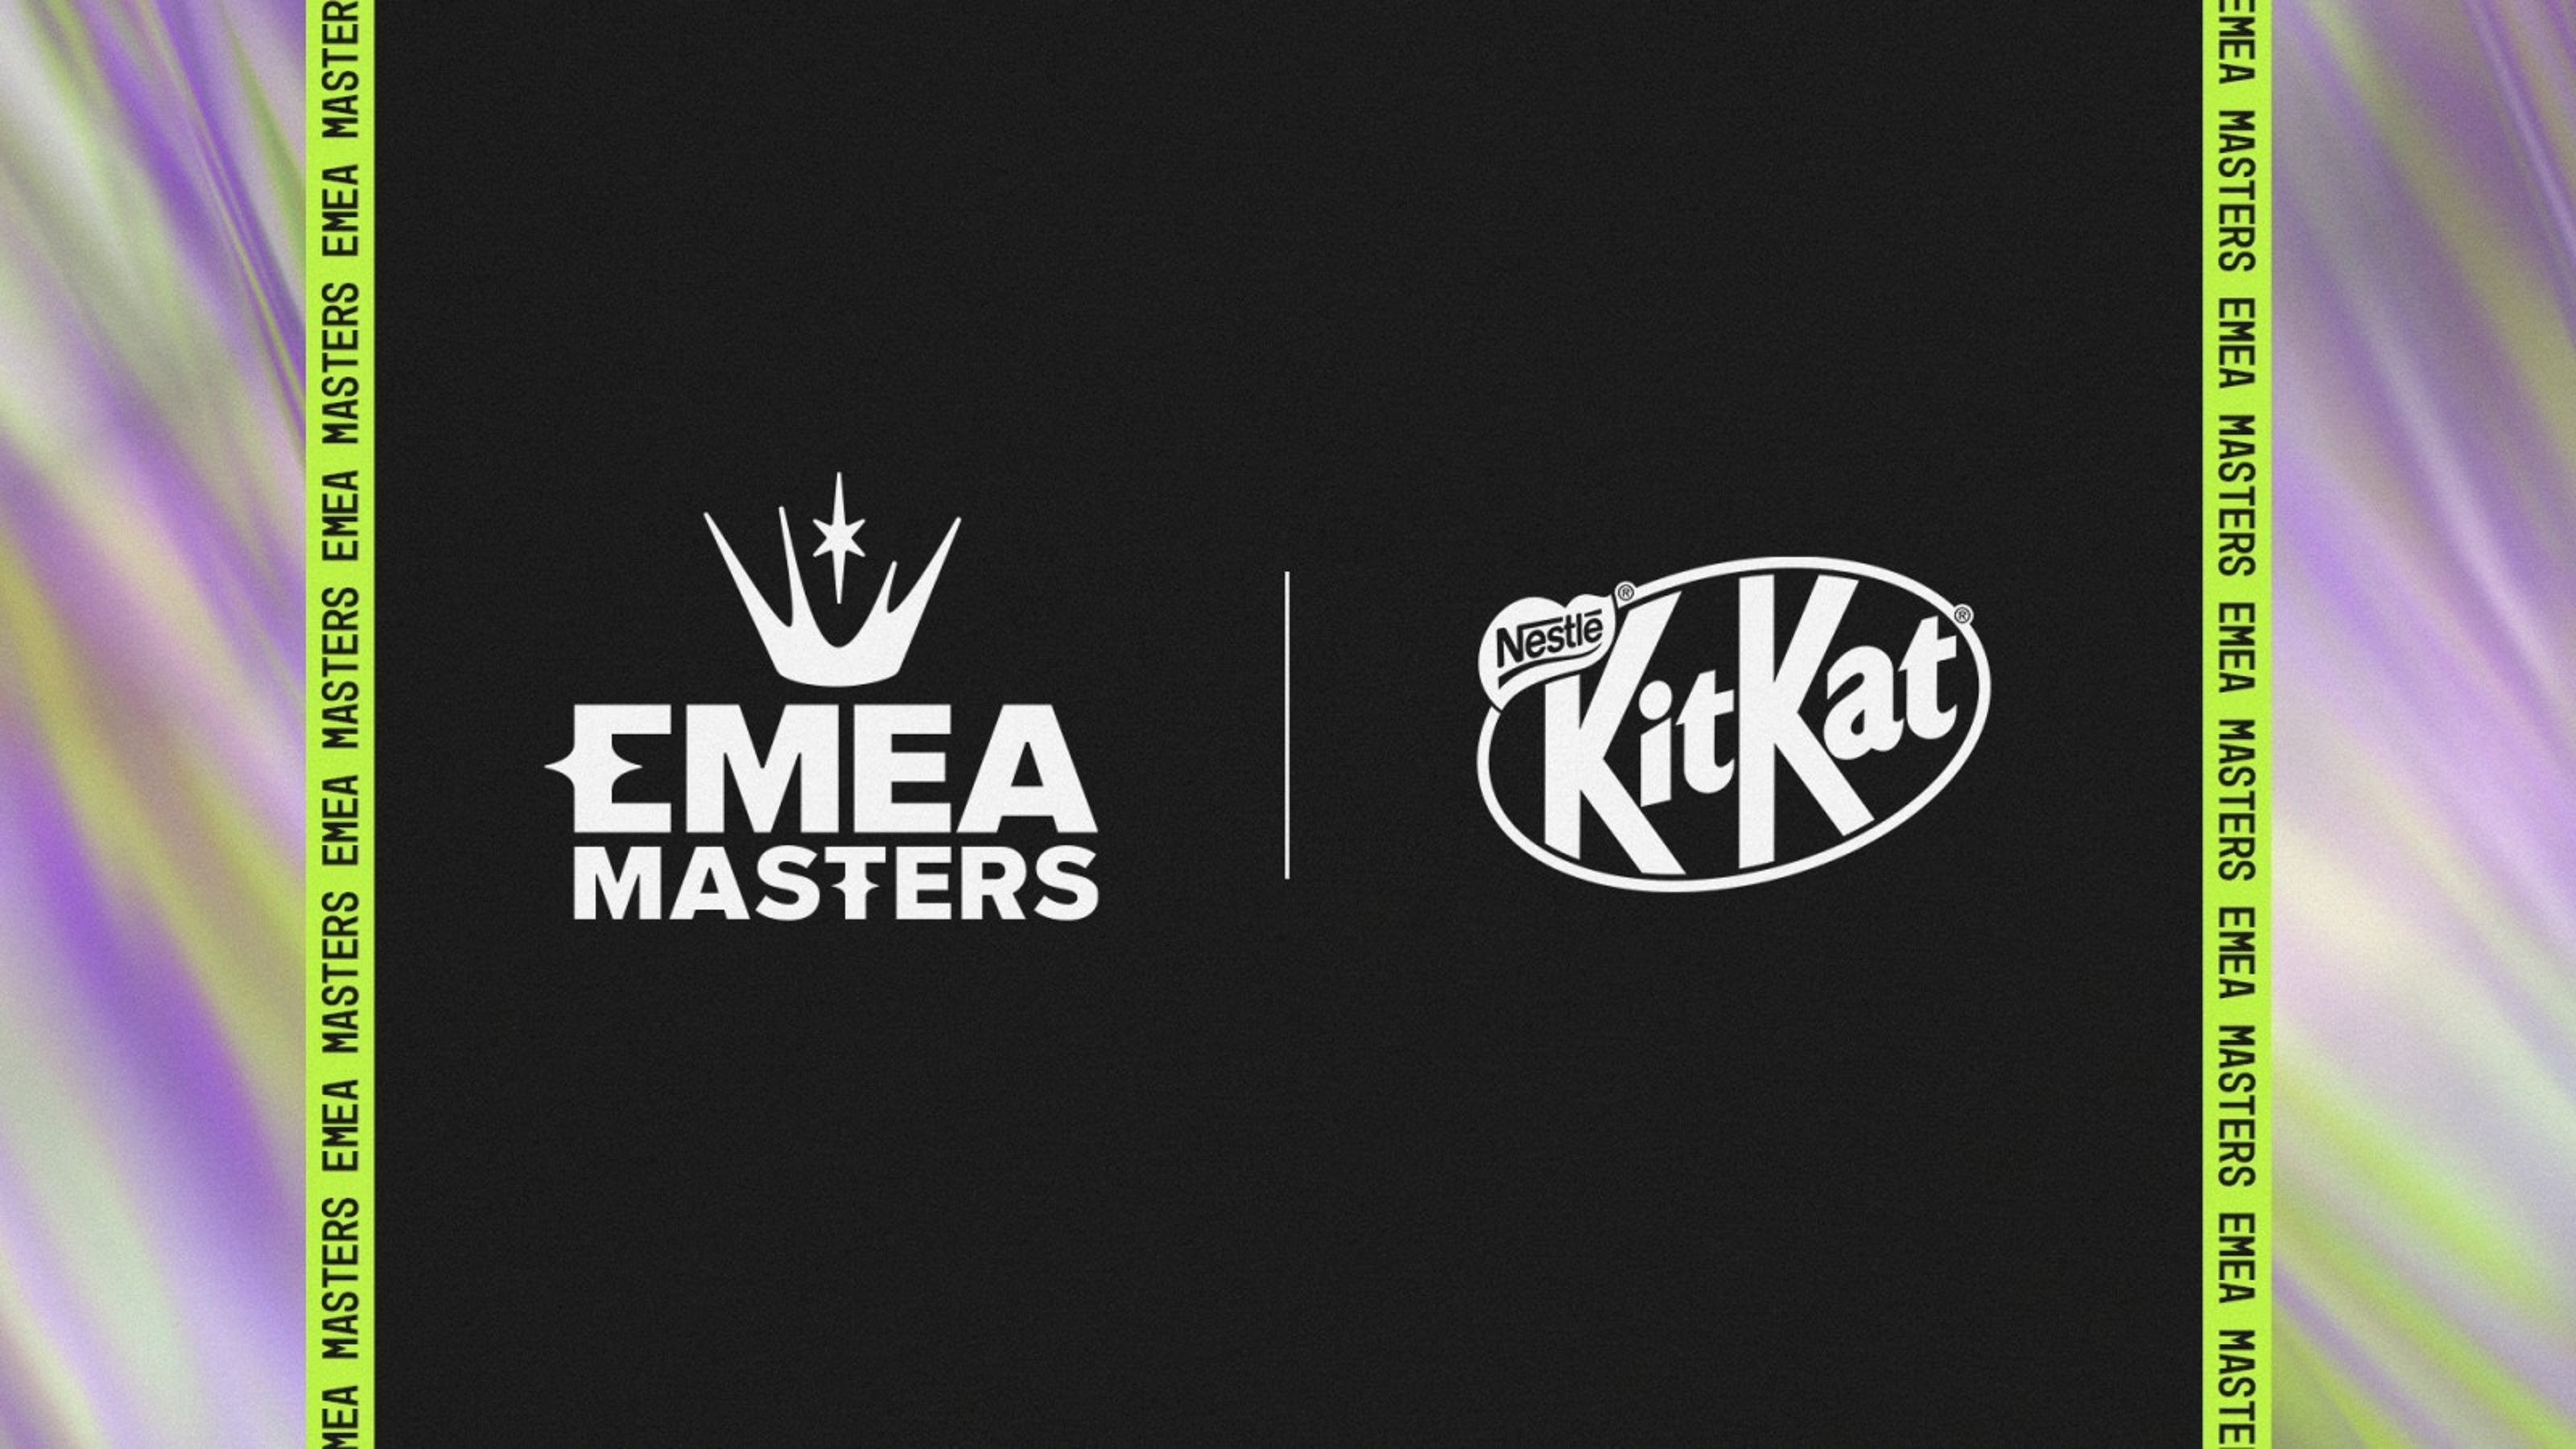 League of Legends EMEA Masters and KitKat will continue to work together